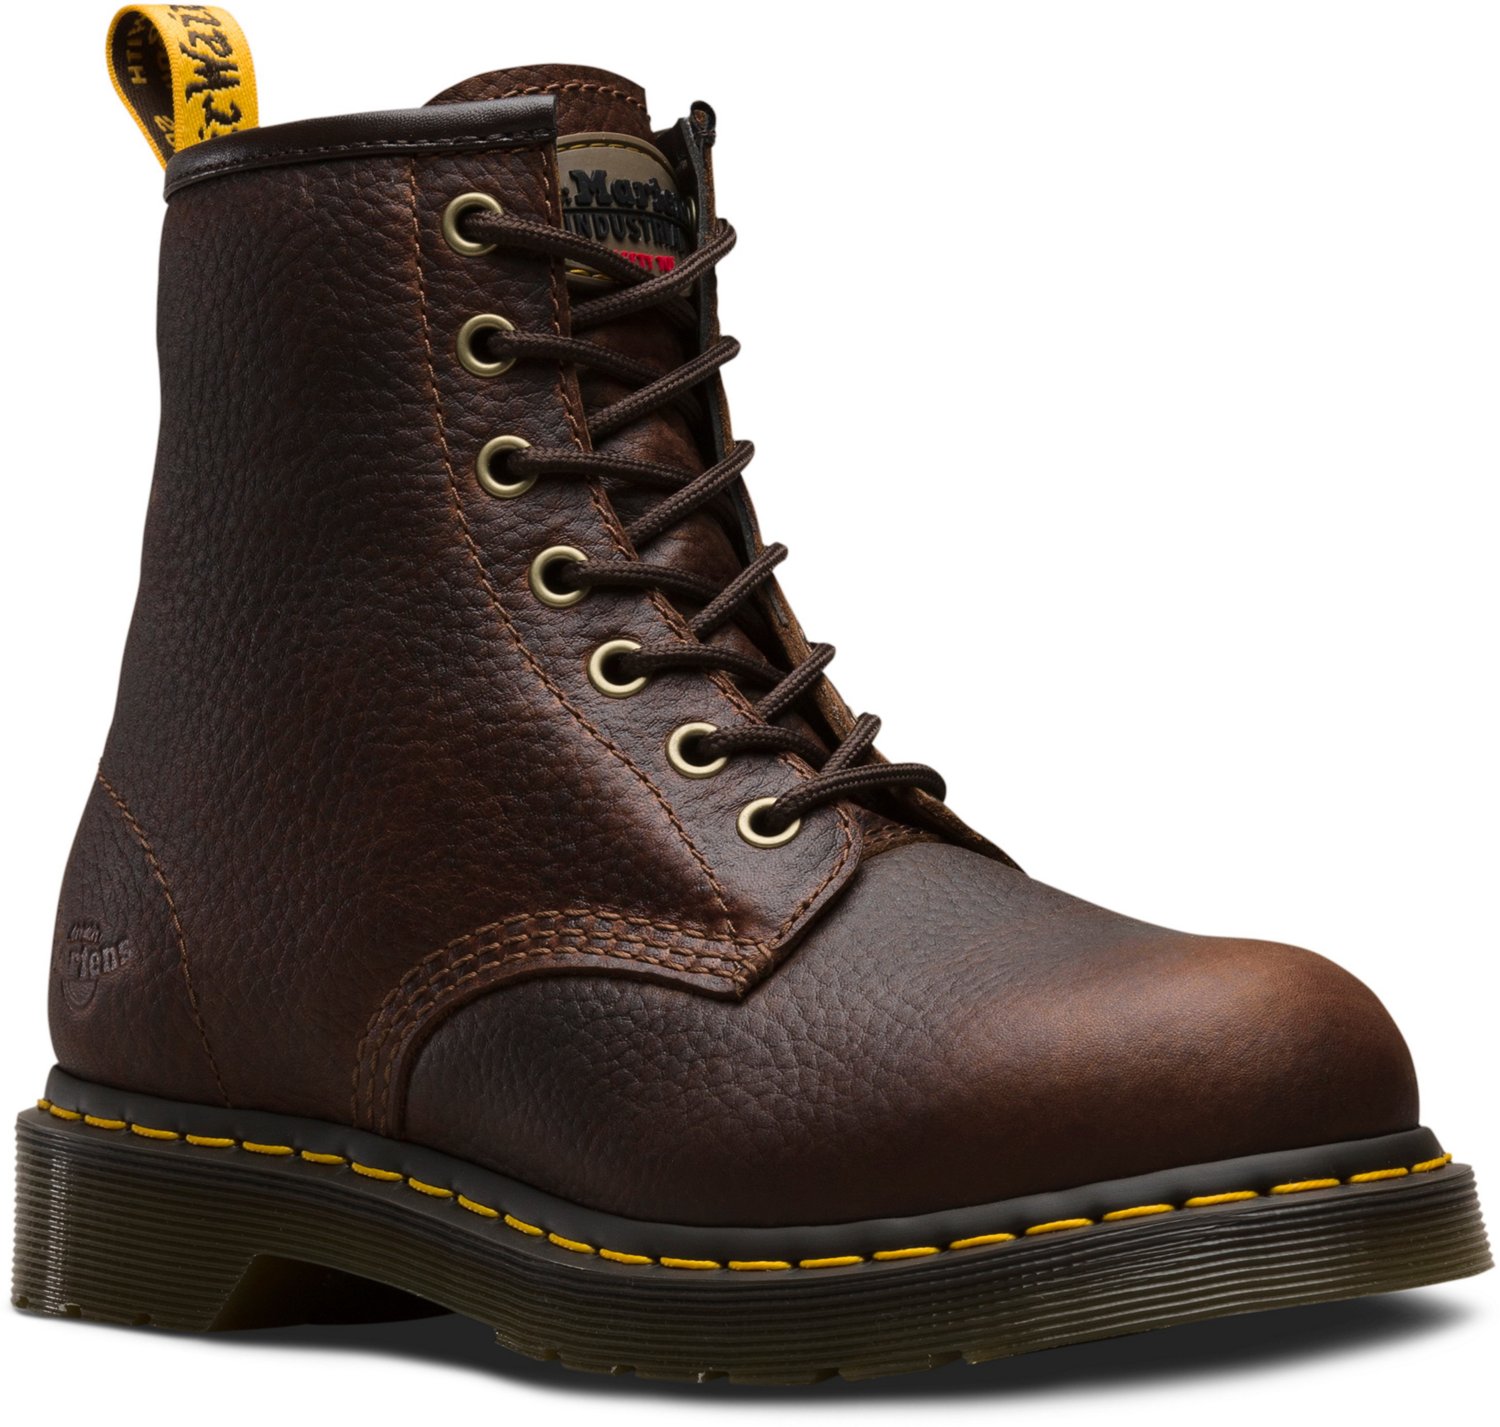 Dr. Martens Women's Maple EH Steel Toe Lace Up Work Boots | Academy